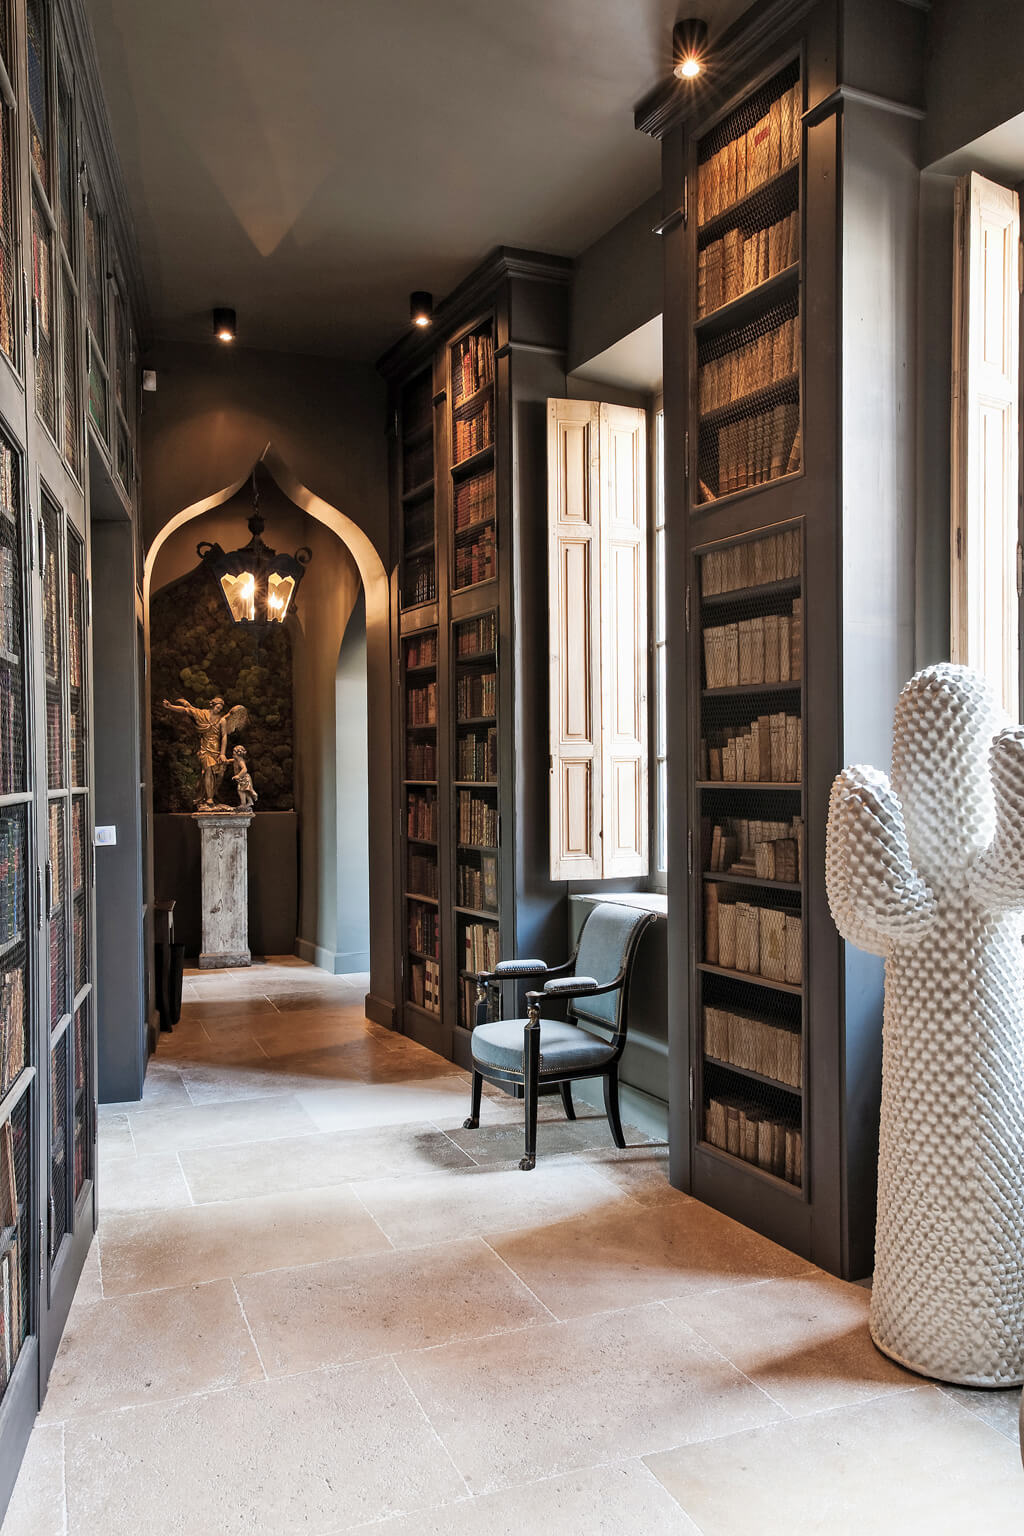 French gray painted built-in bookshelves, limestone, and modern art in an Avignon mansion. Come see a Breathtaking French Château Tour in Provence With Photo Gallery of Historical Architecture, Dramatic Eclectic Interiors & Oddities!